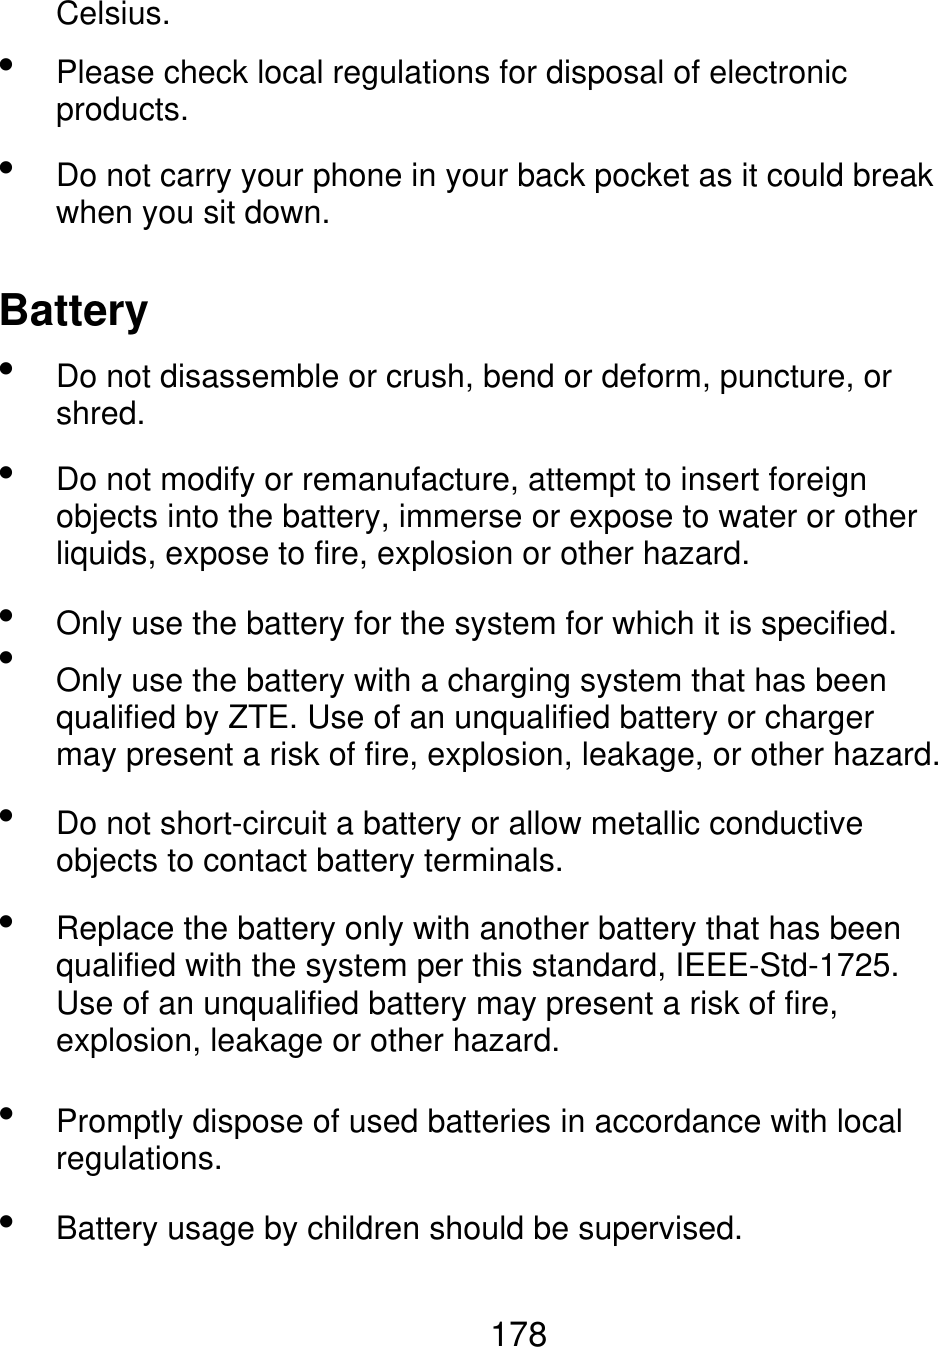 Celsius.   Please check local regulations for disposal of electronic products. Do not carry your phone in your back pocket as it could break when you sit down. Battery       Do not disassemble or crush, bend or deform, puncture, or shred. Do not modify or remanufacture, attempt to insert foreign objects into the battery, immerse or expose to water or other liquids, expose to fire, explosion or other hazard. Only use the battery for the system for which it is specified. Only use the battery with a charging system that has been qualified by ZTE. Use of an unqualified battery or charger may present a risk of fire, explosion, leakage, or other hazard. Do not short-circuit a battery or allow metallic conductive objects to contact battery terminals. Replace the battery only with another battery that has been qualified with the system per this standard, IEEE-Std-1725. Use of an unqualified battery may present a risk of fire, explosion, leakage or other hazard. Promptly dispose of used batteries in accordance with local regulations. Battery usage by children should be supervised.   178 